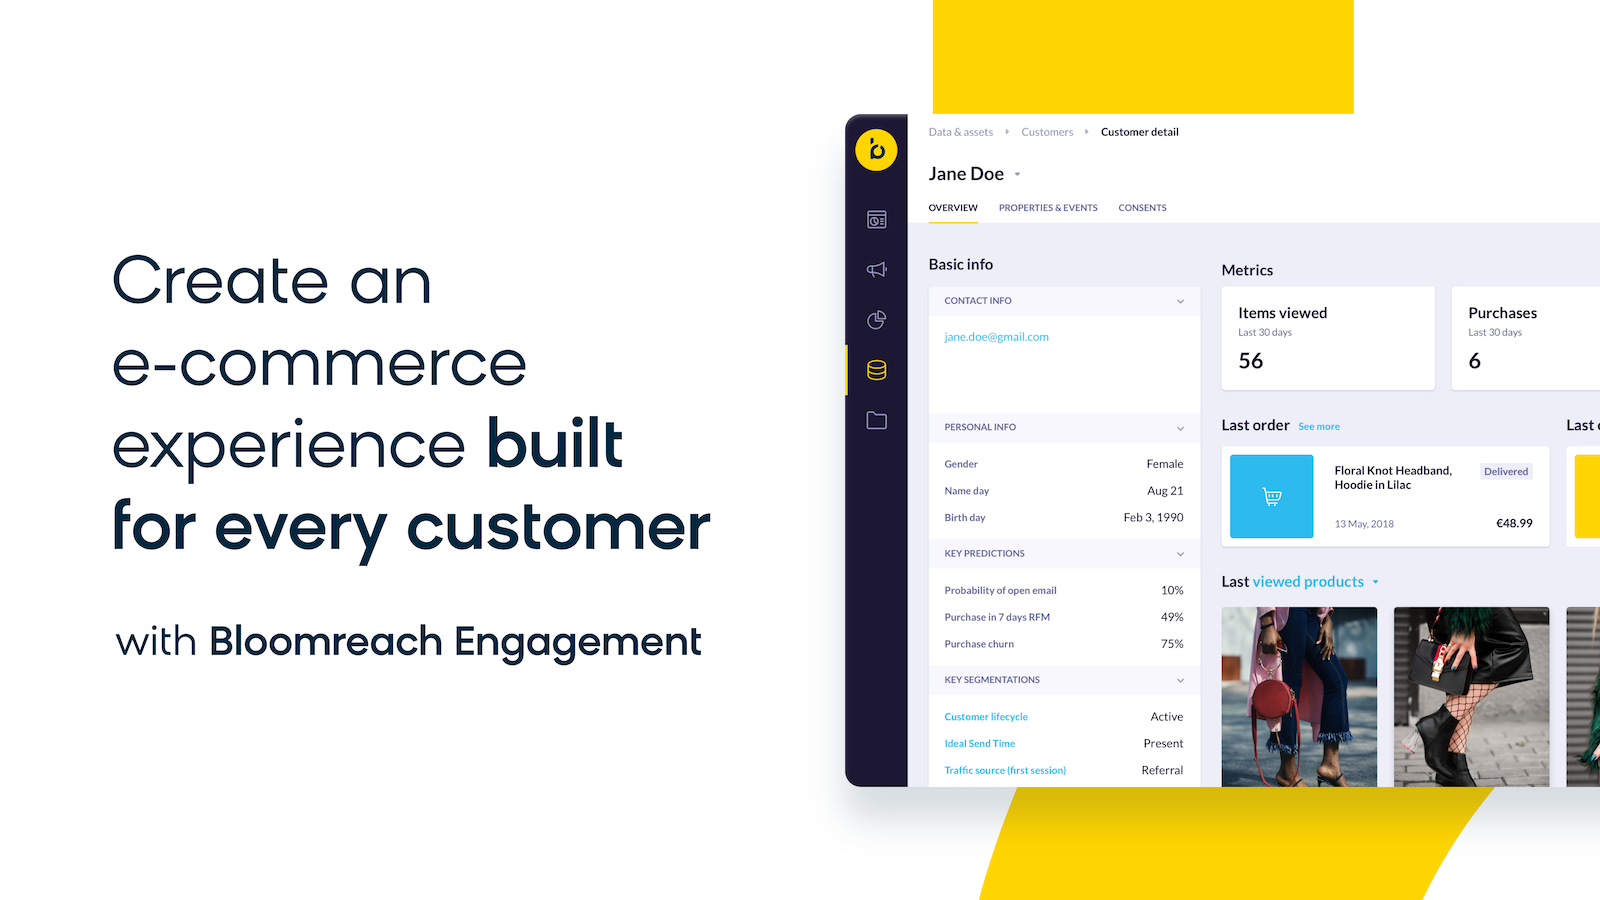 Create an e-commerce experience built for every customer